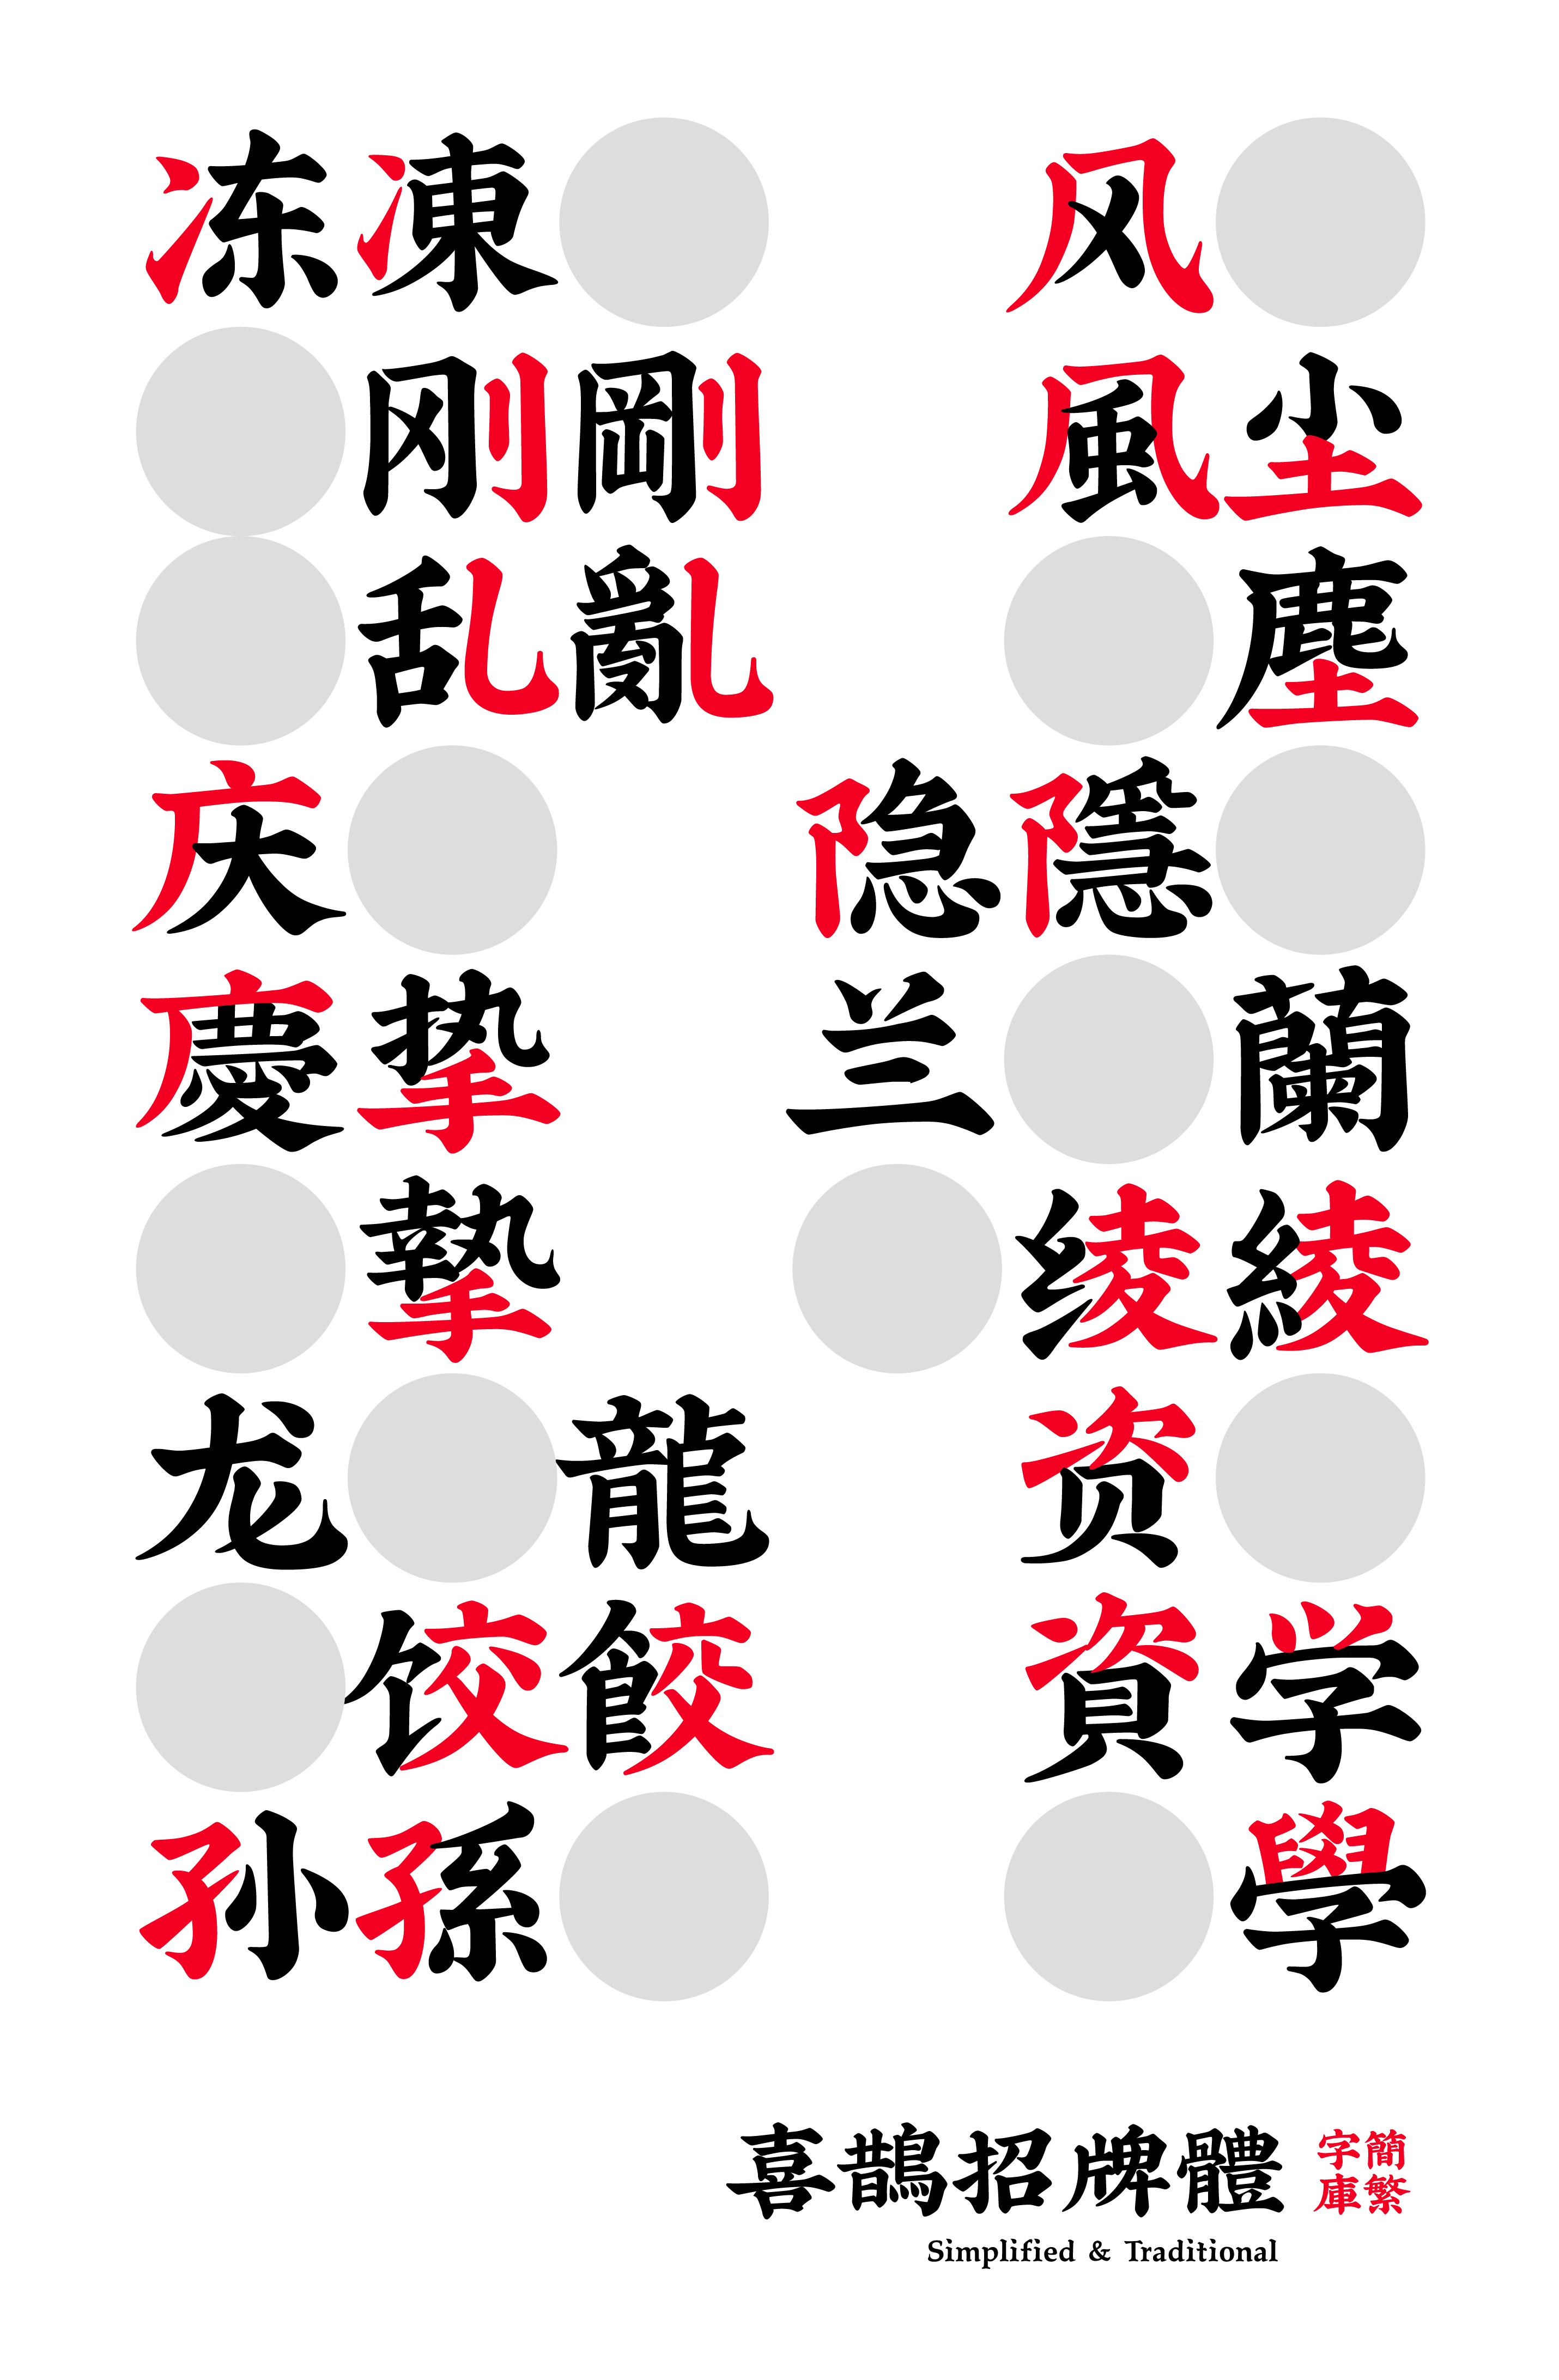 It is very suitable for various Chinese style text or headline scenes, posters and headlines.